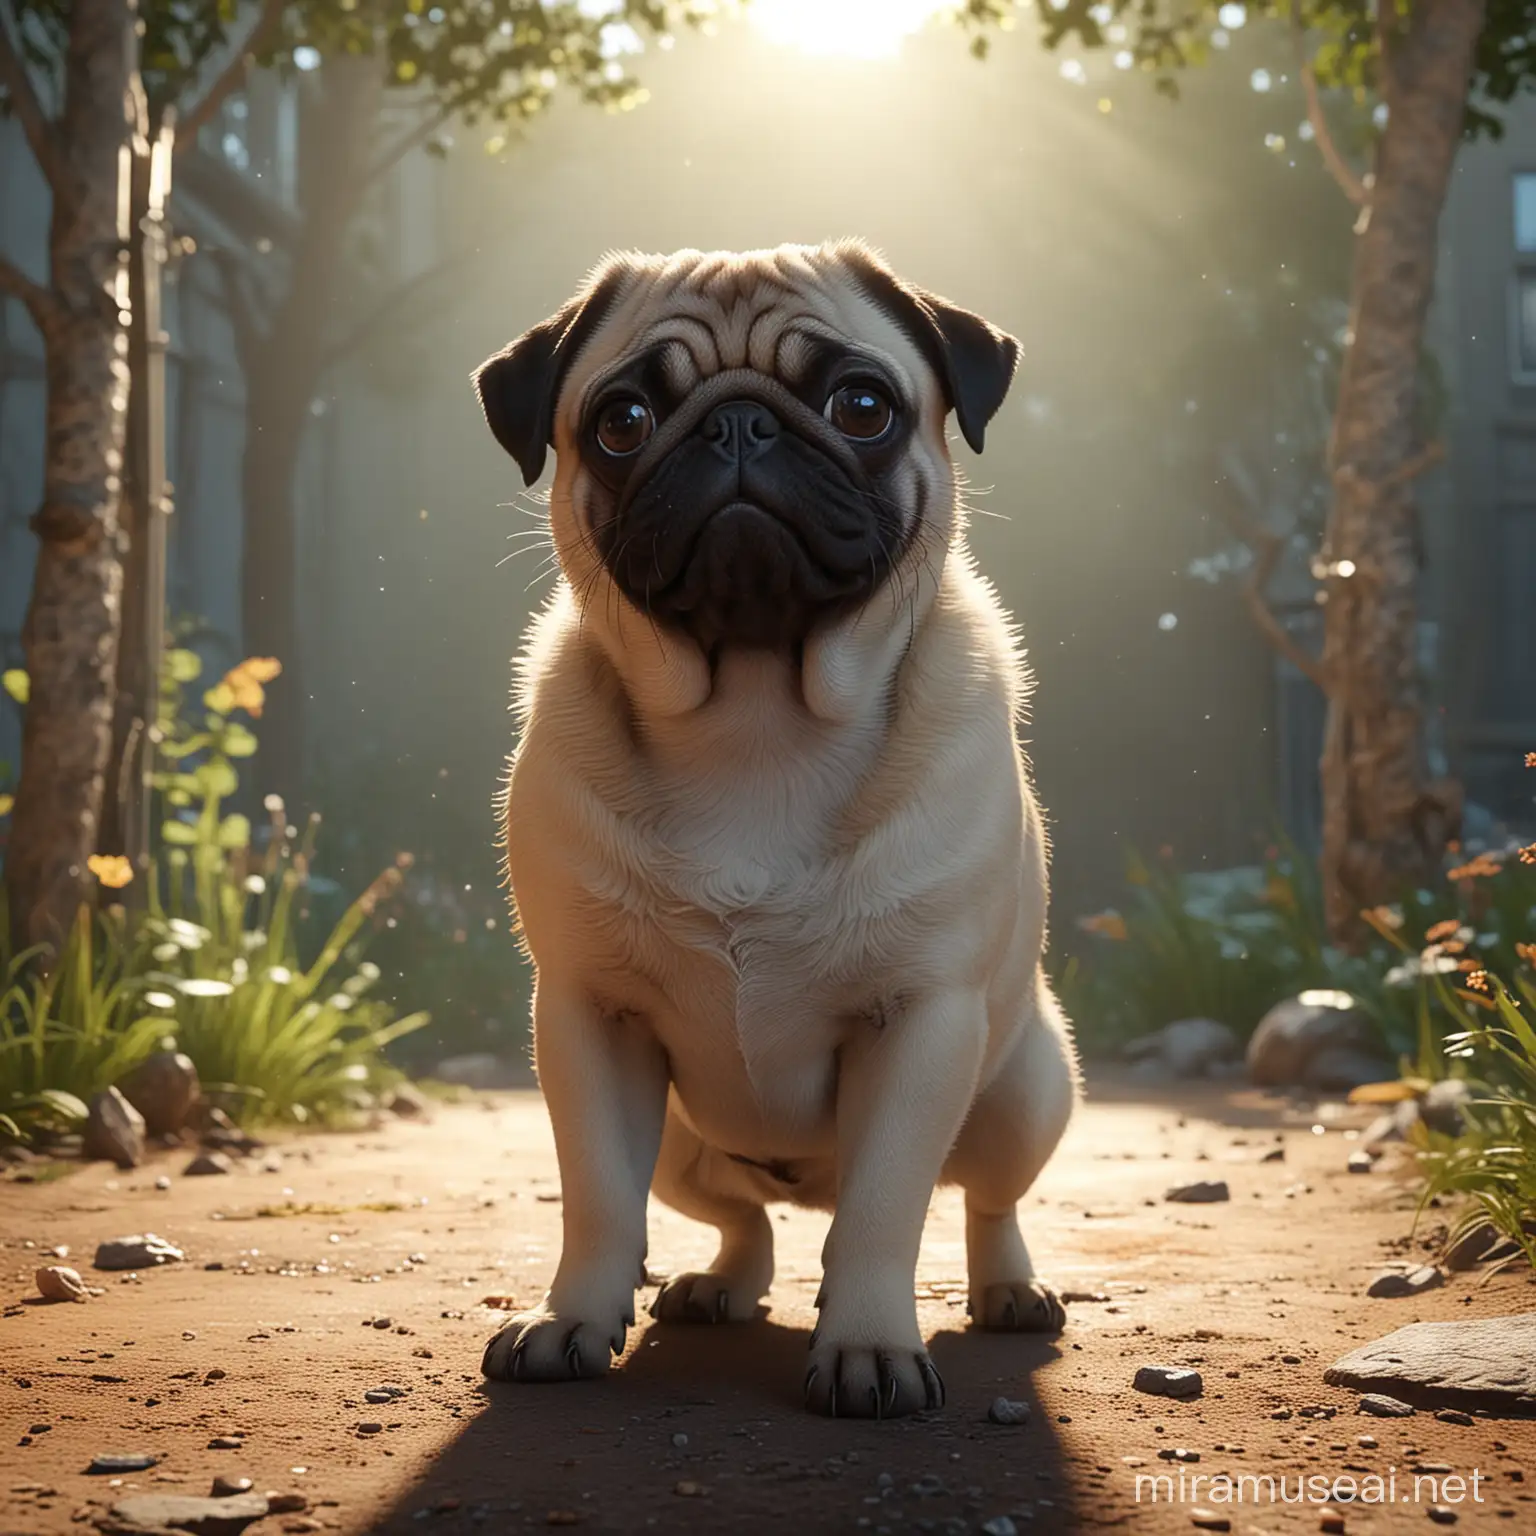 Adorable Pug in a Dreamy Whimsical Setting with Professional Lighting